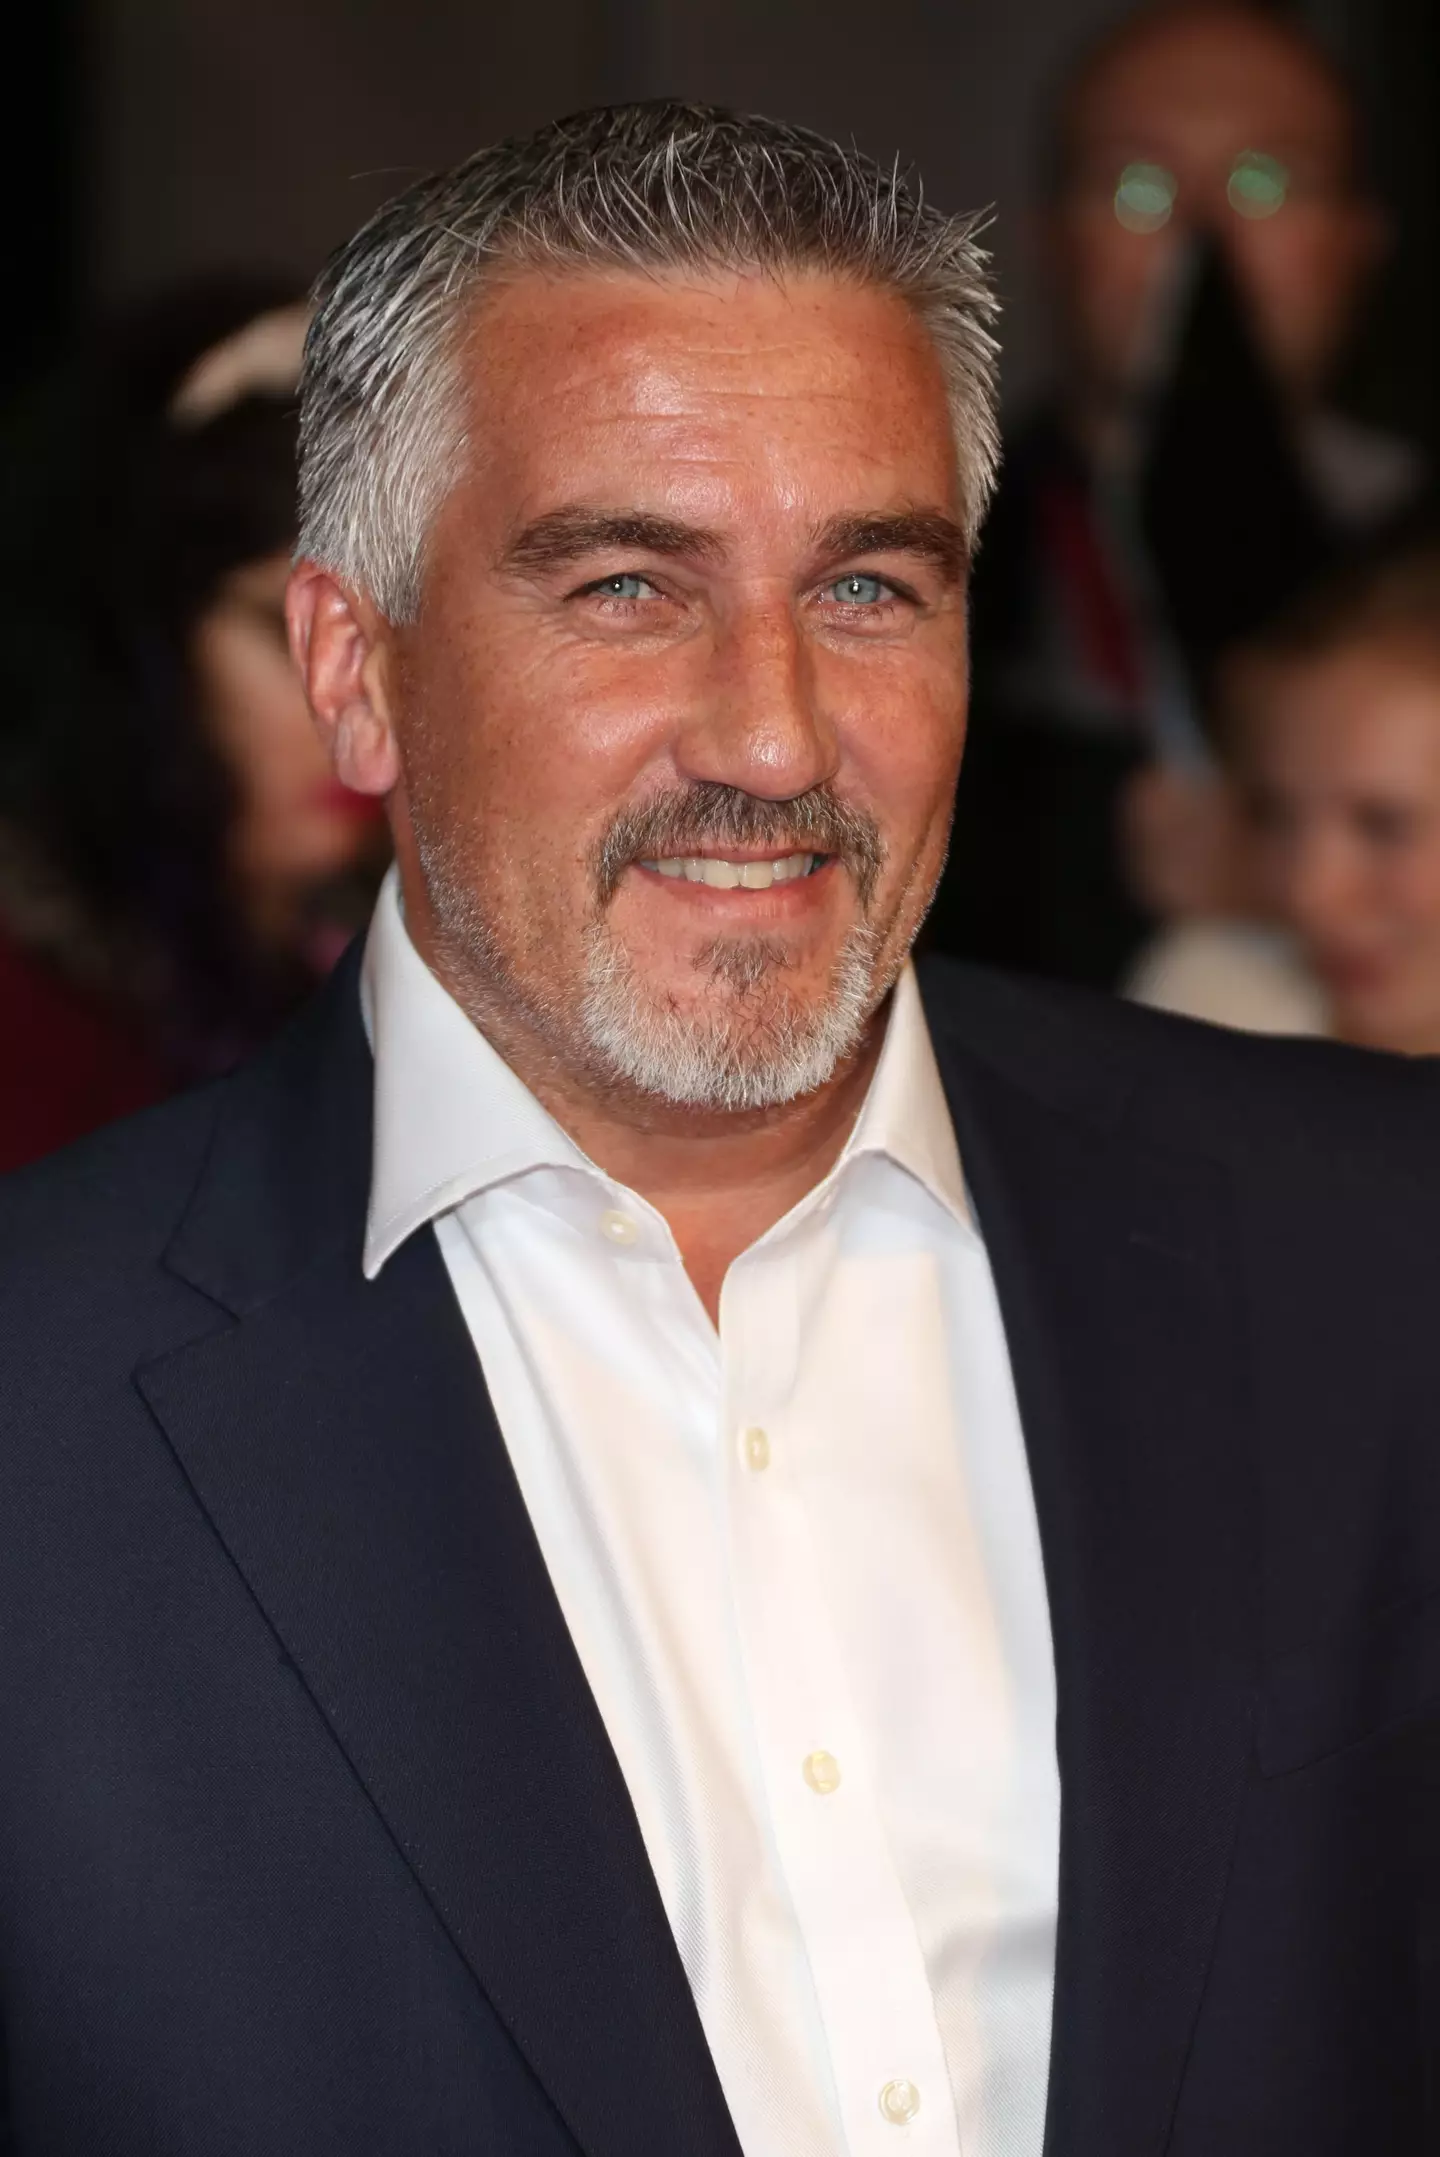 Paul Hollywood, the man with the golden handshake.